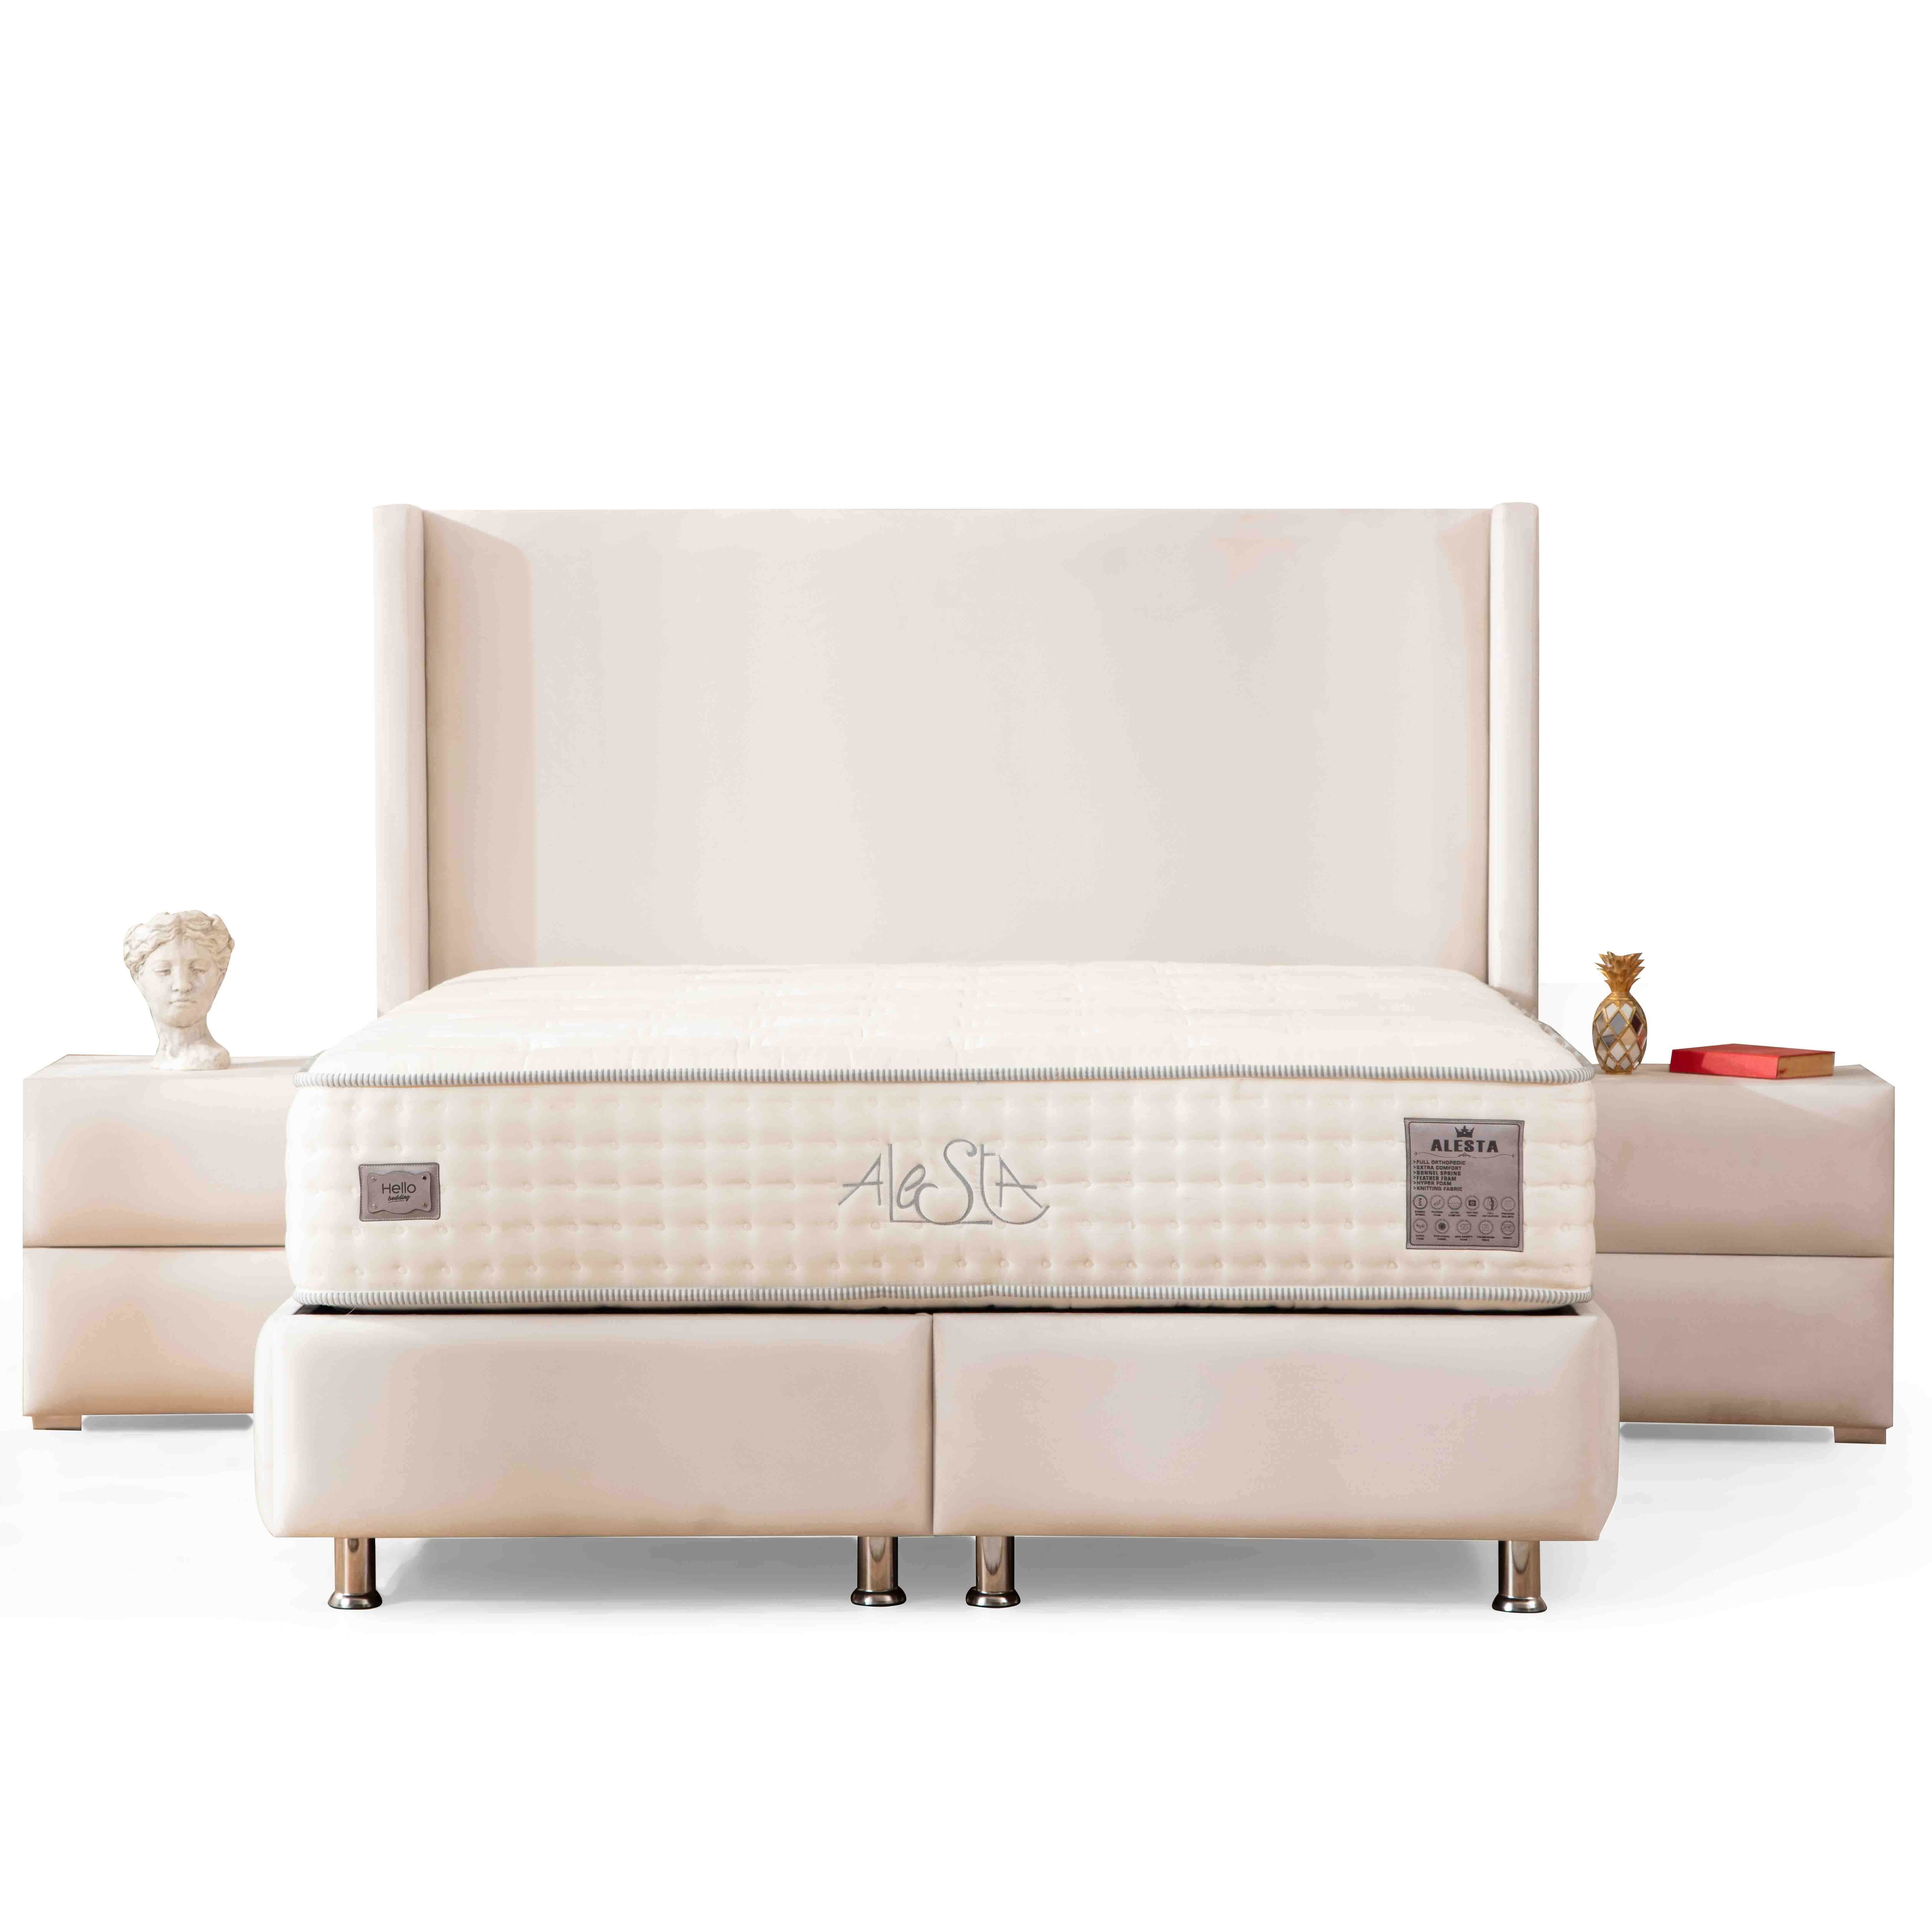 Lucca Bed With Storage 160*200